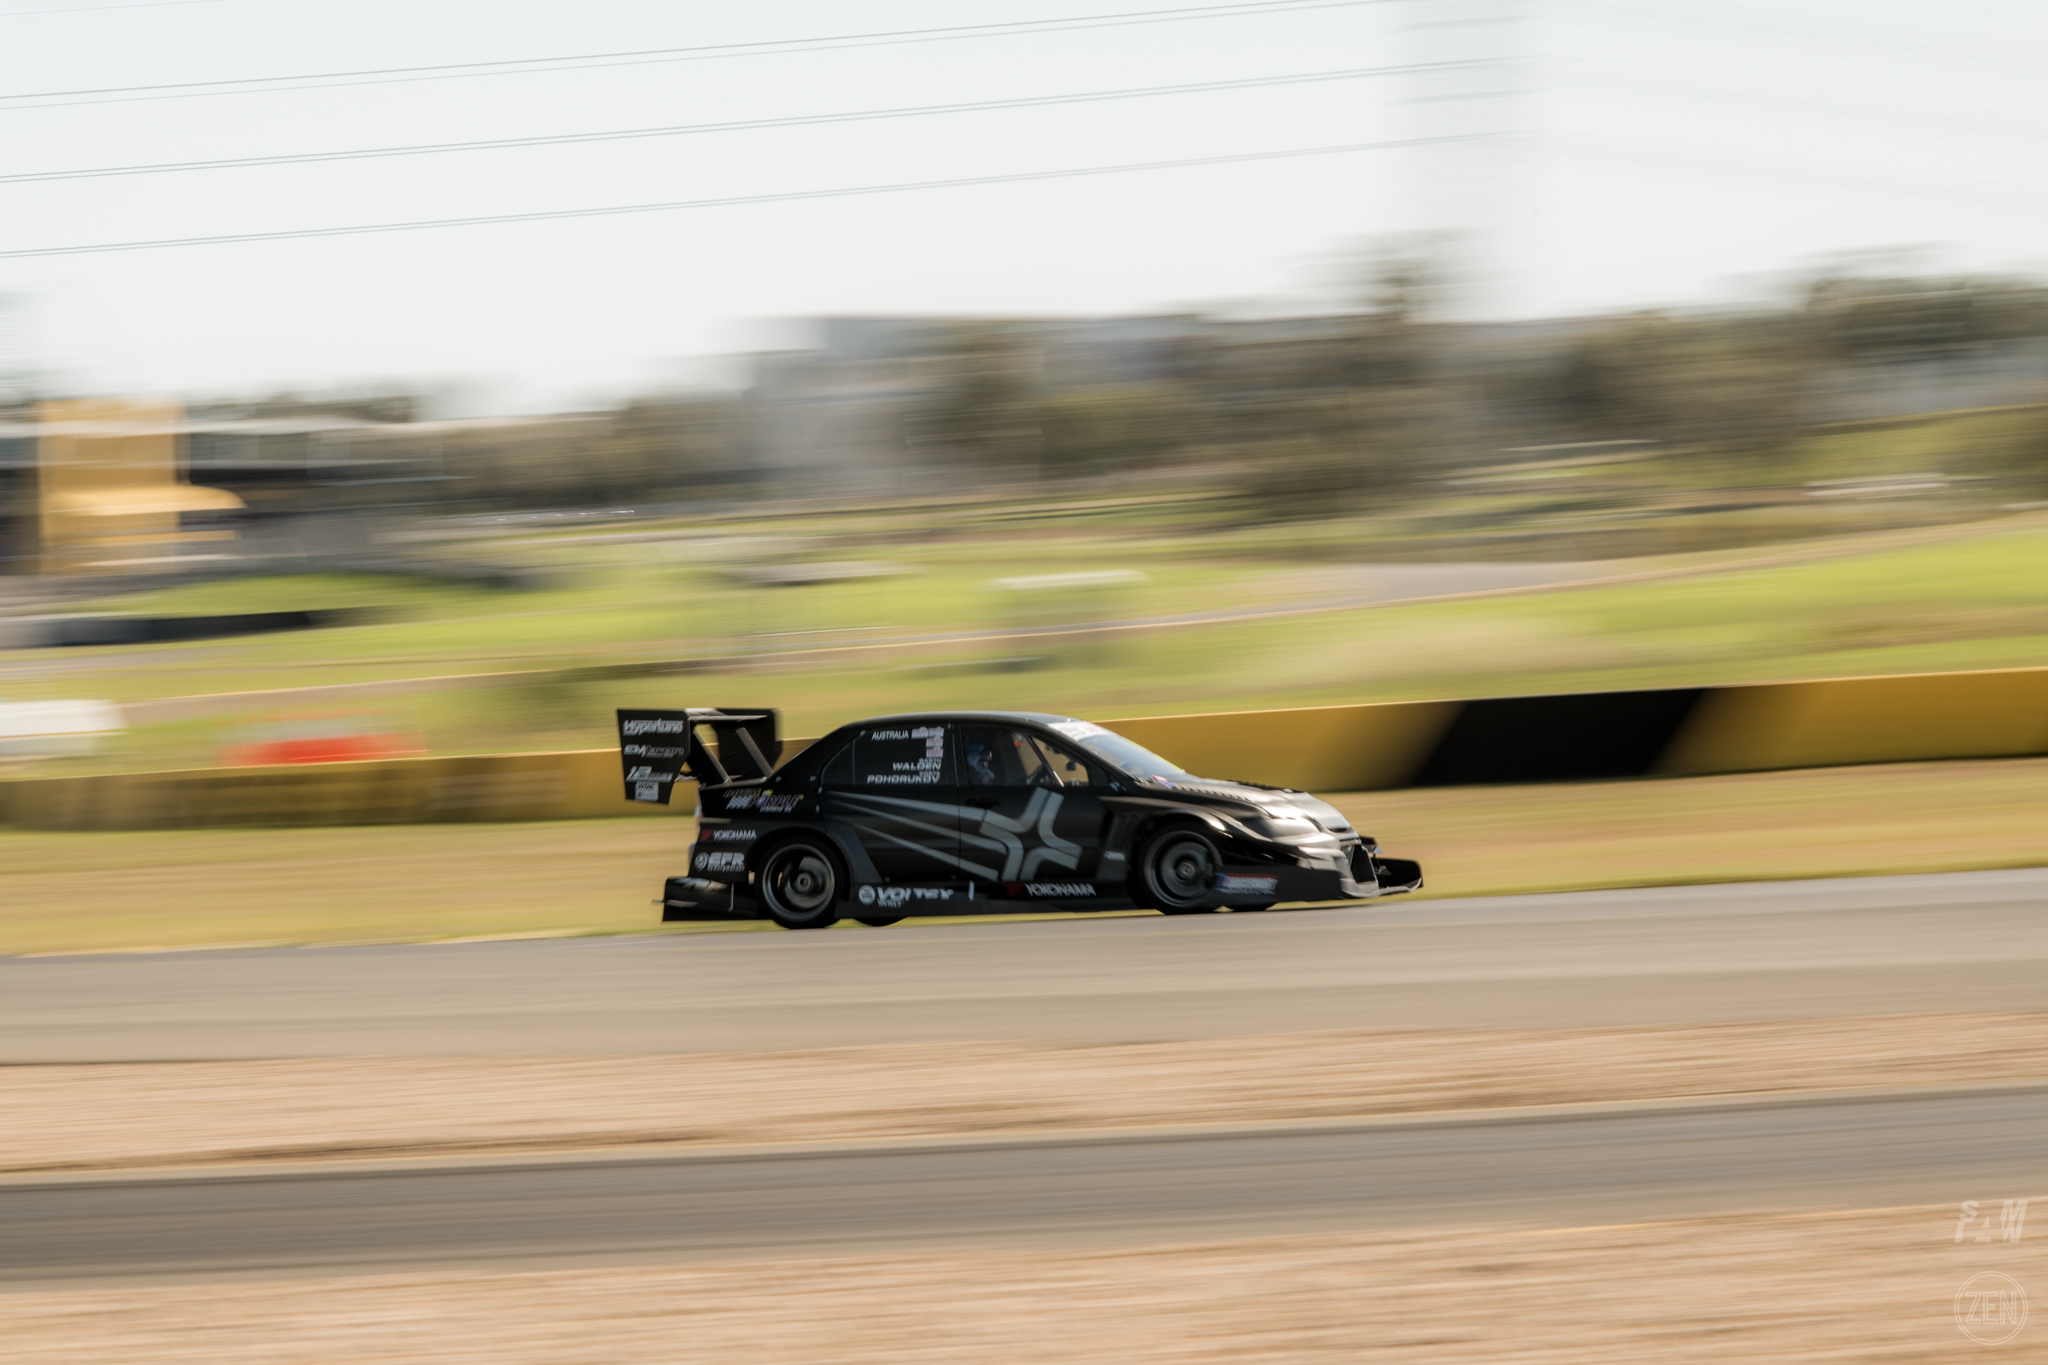 2019-10-19 - WTAC Day 2 004